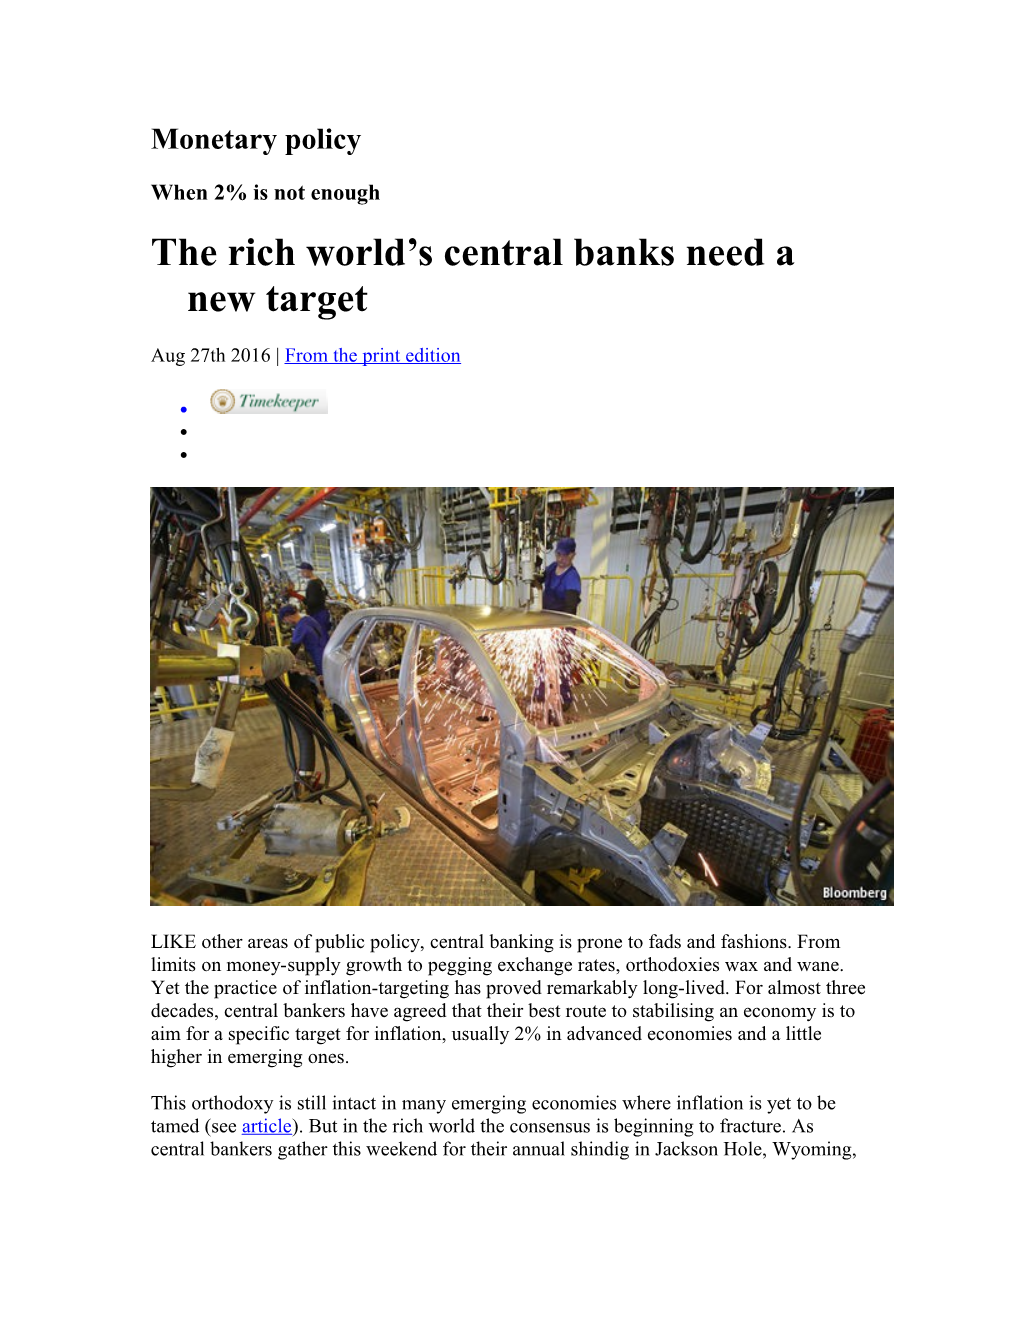 The Rich World S Central Banks Need a New Target